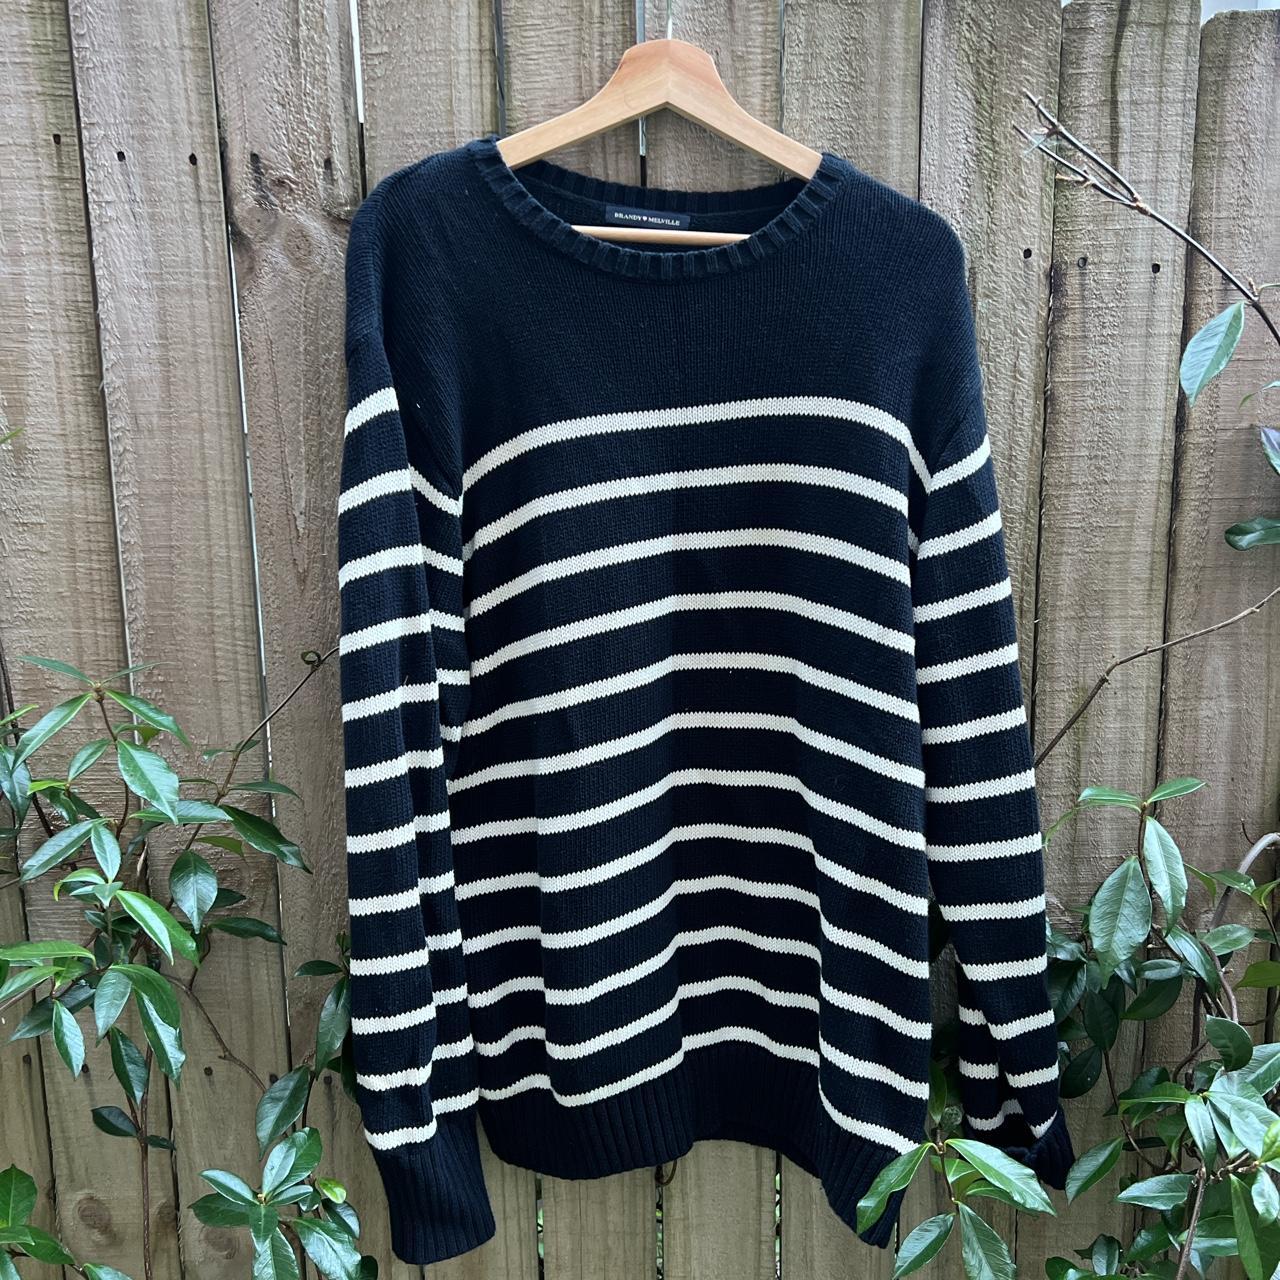 Oversized navy and white stripped jumper - super... - Depop